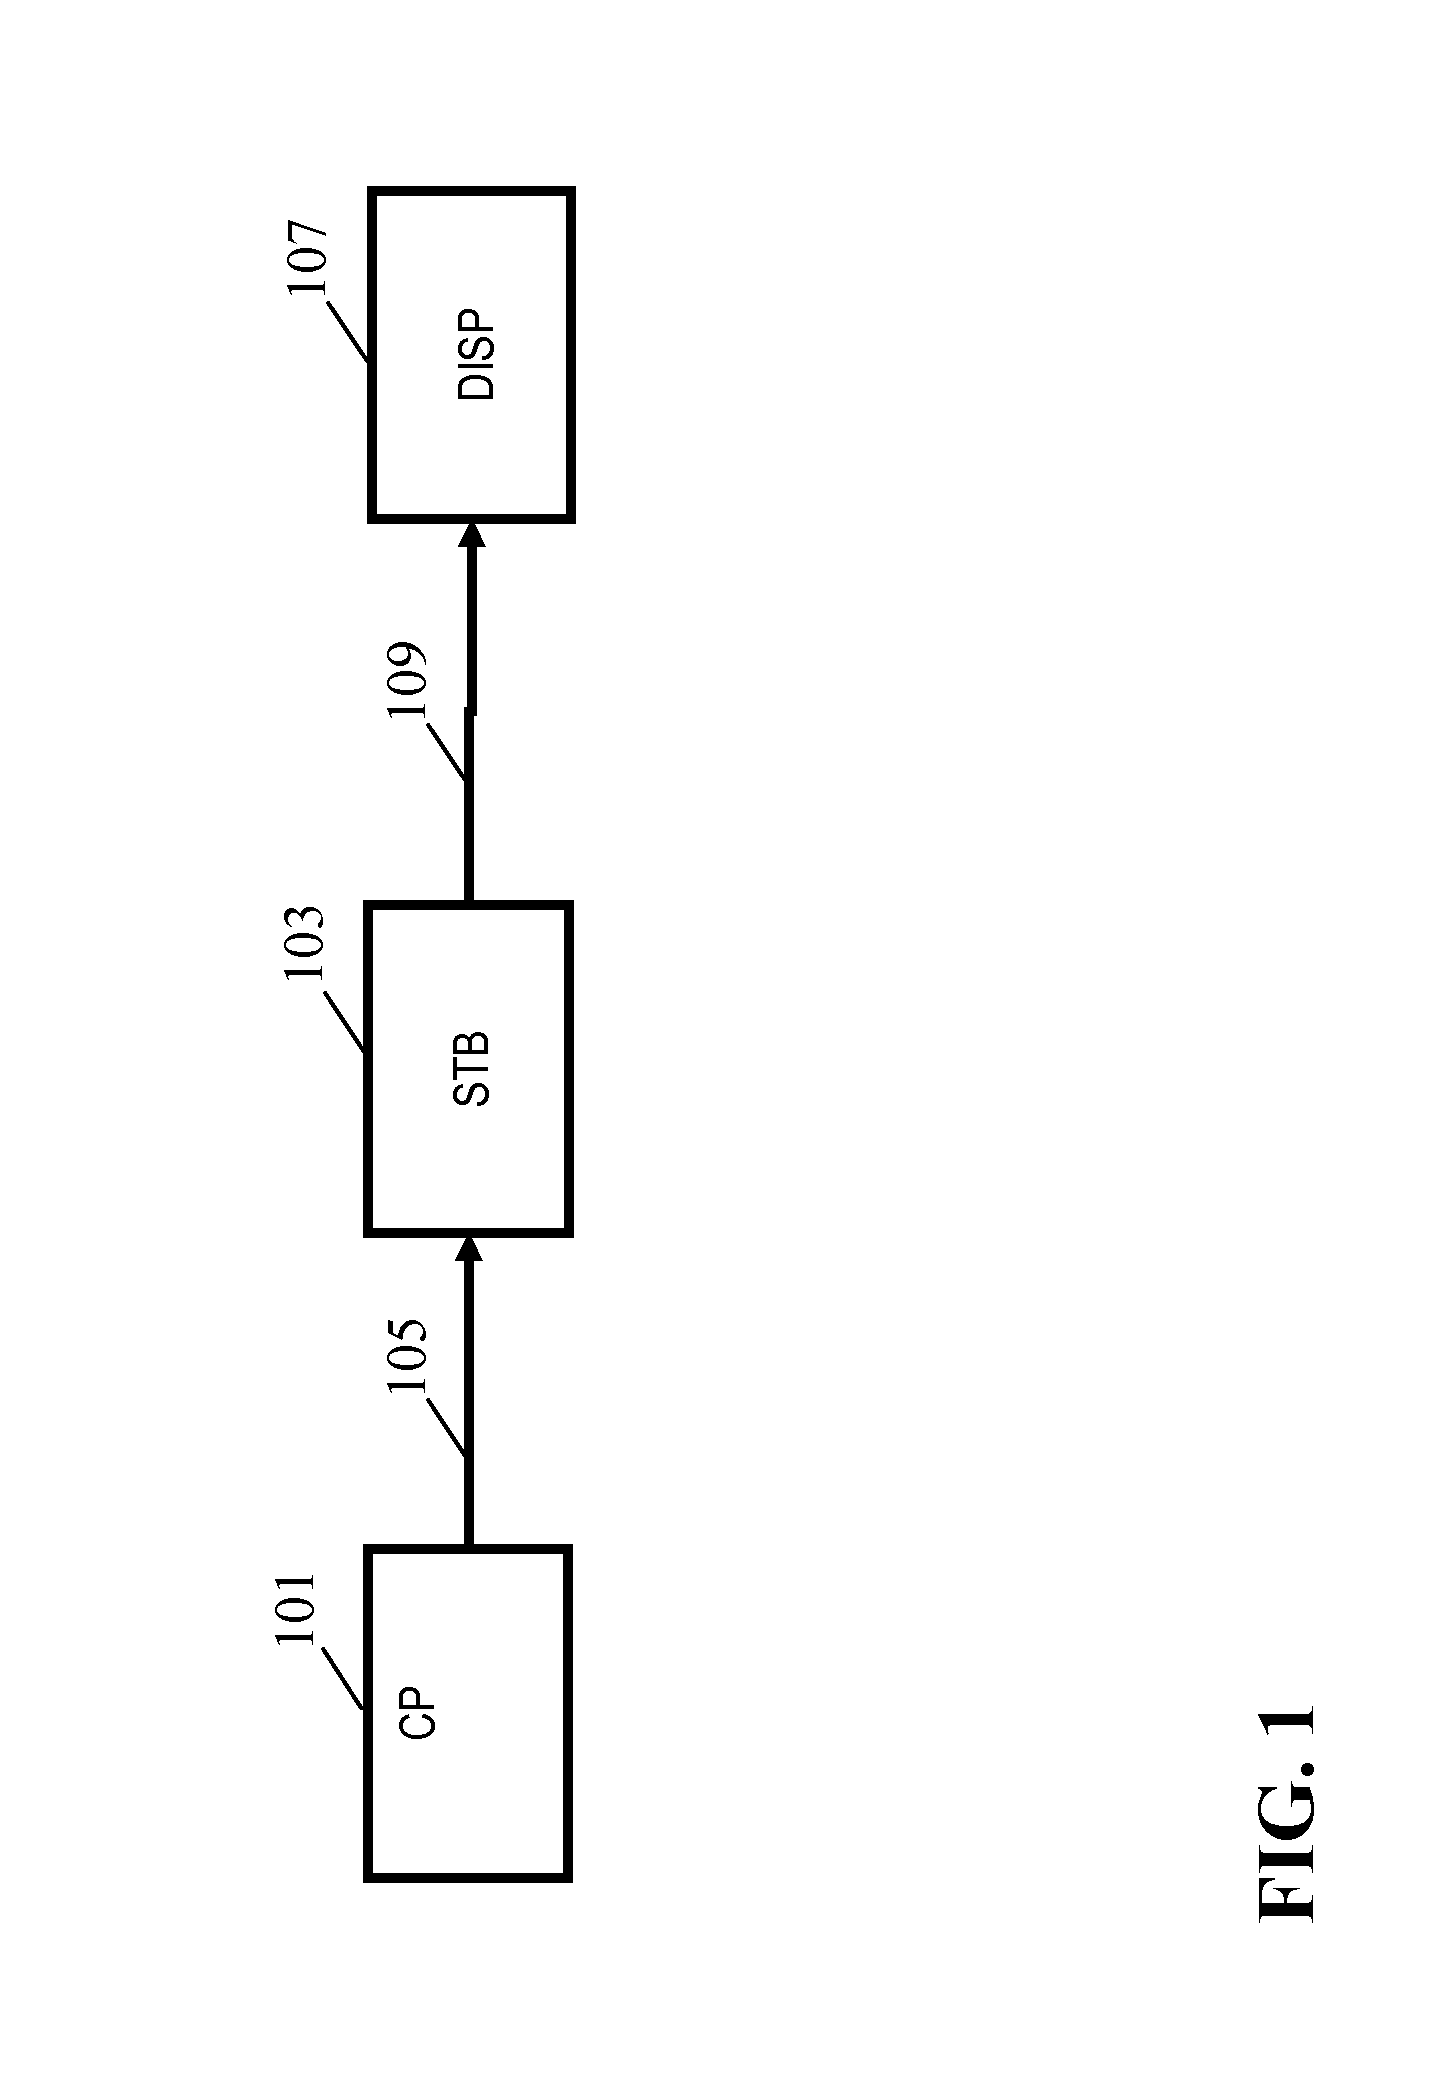 High dynamic range image signal generation and processing